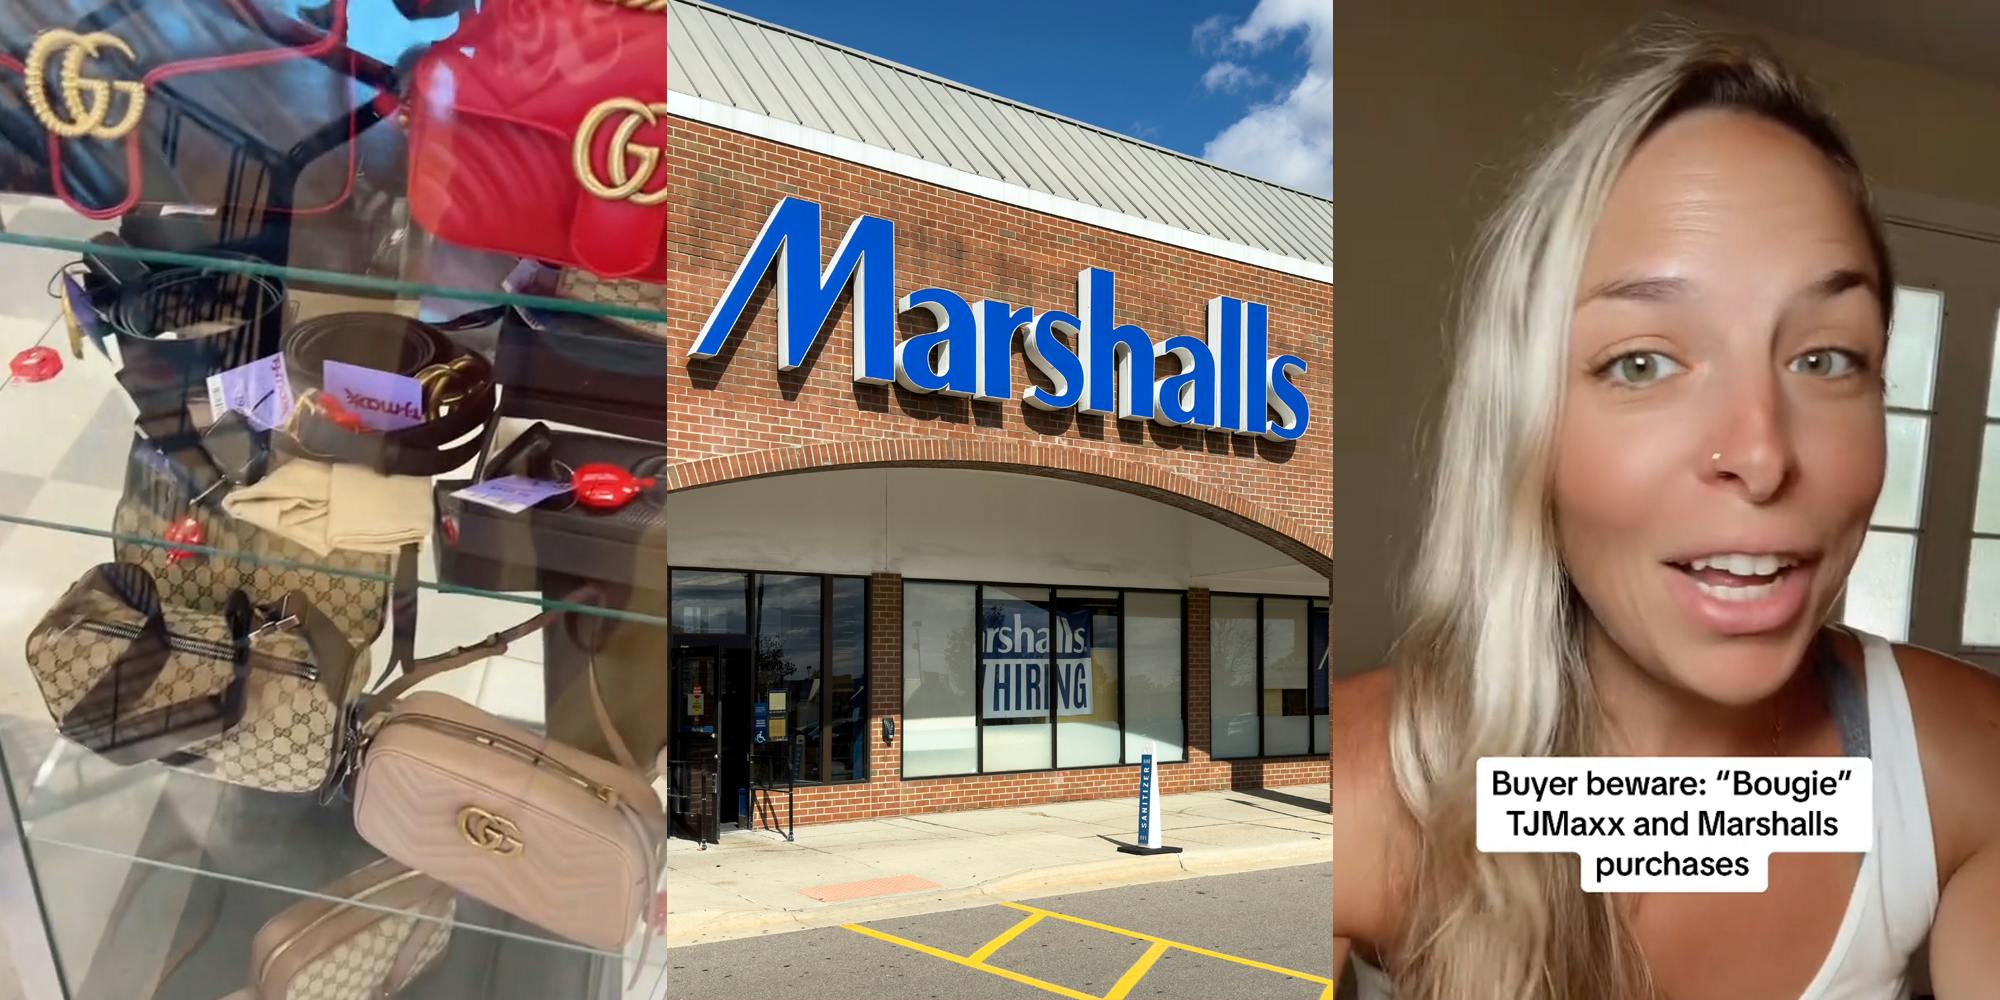 designer goods on display at Marshalls/TJ Maxx (l) Marshalls building with sign (c) woman speaking with caption "Buyer beware: "Boujie" TJMAXX and Marshalls purchases" (r)